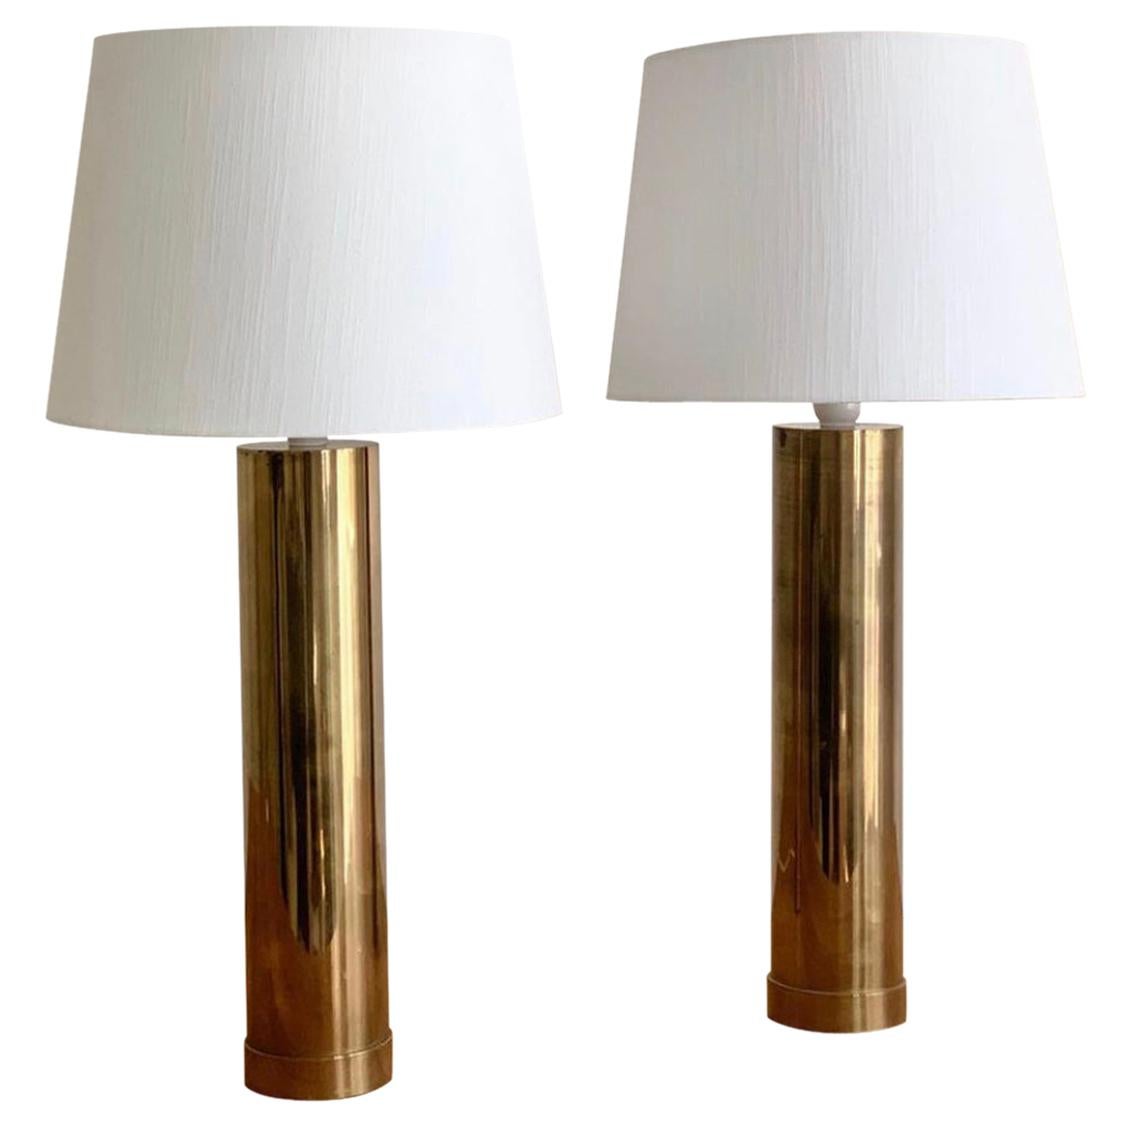 Pair of Bergboms "B-09" Table Lamps in Brass, 1960s